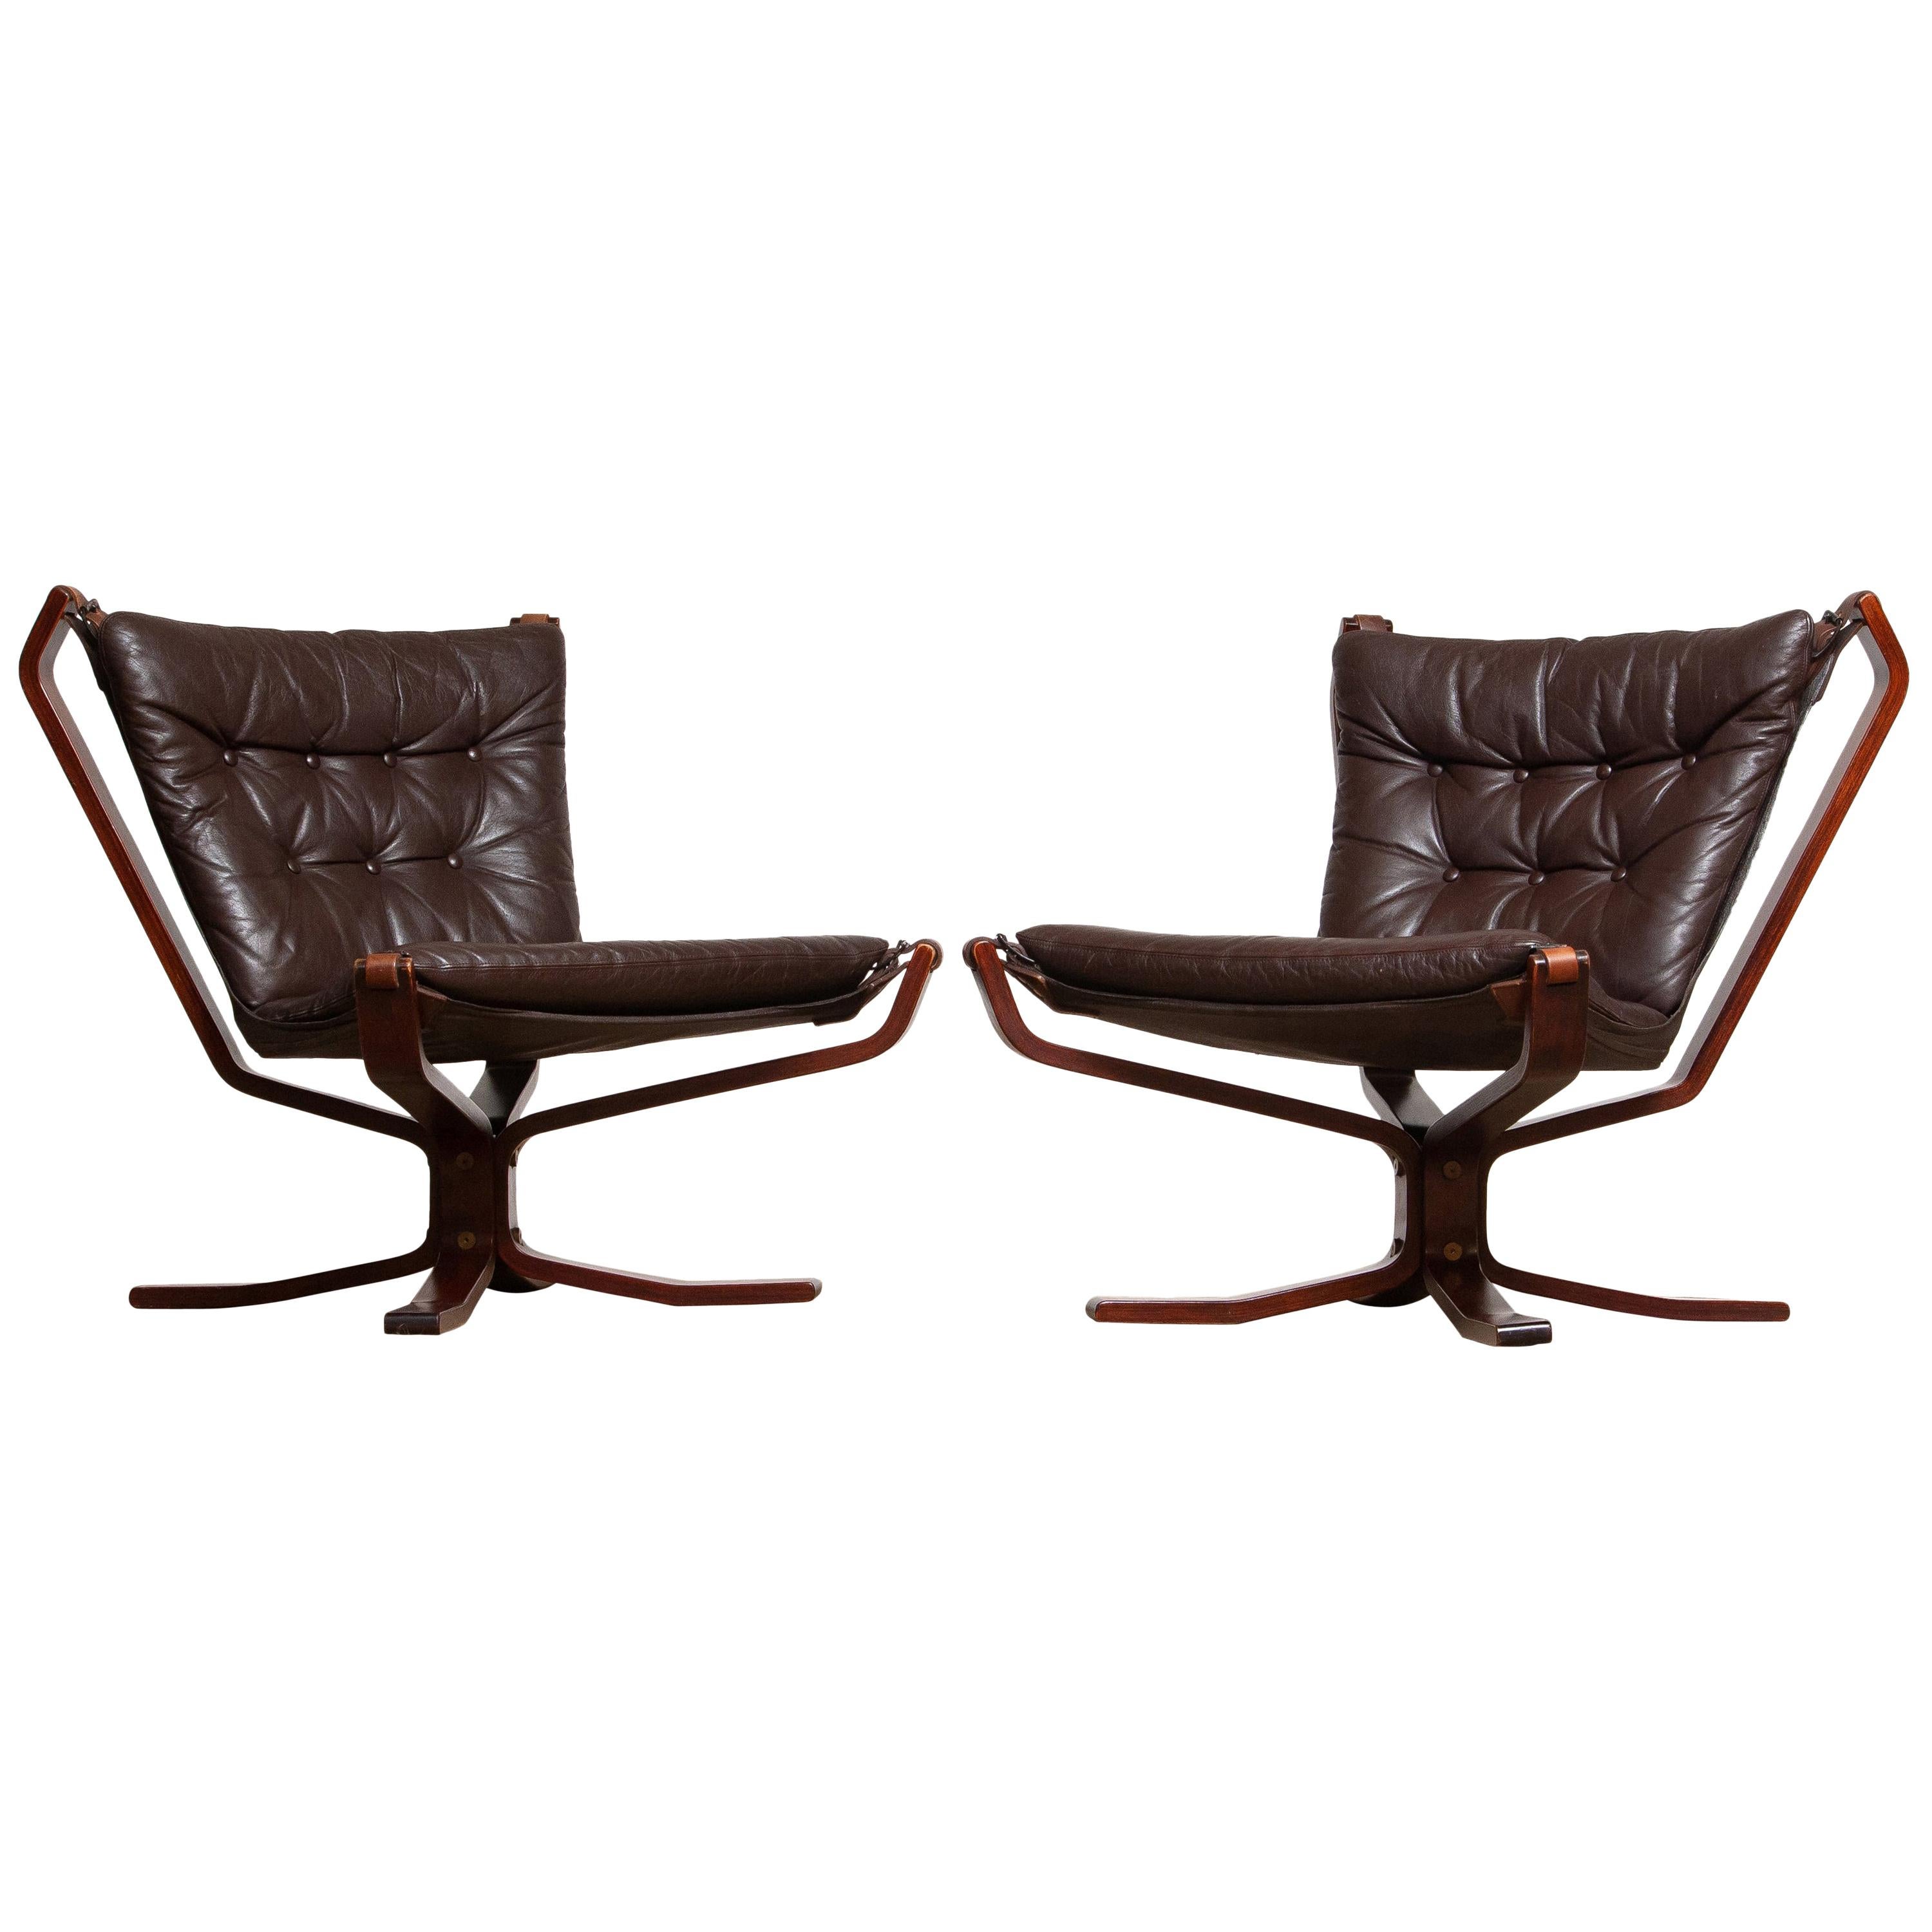 Extremely beautiful set of two 'Falcon' lounge or easy chairs designed by Sigurd Resell and made in Denmark.
(Recognizable for the thick leather belts at the corners.)
The chairs are in very good and original condition.
Note: We have also the